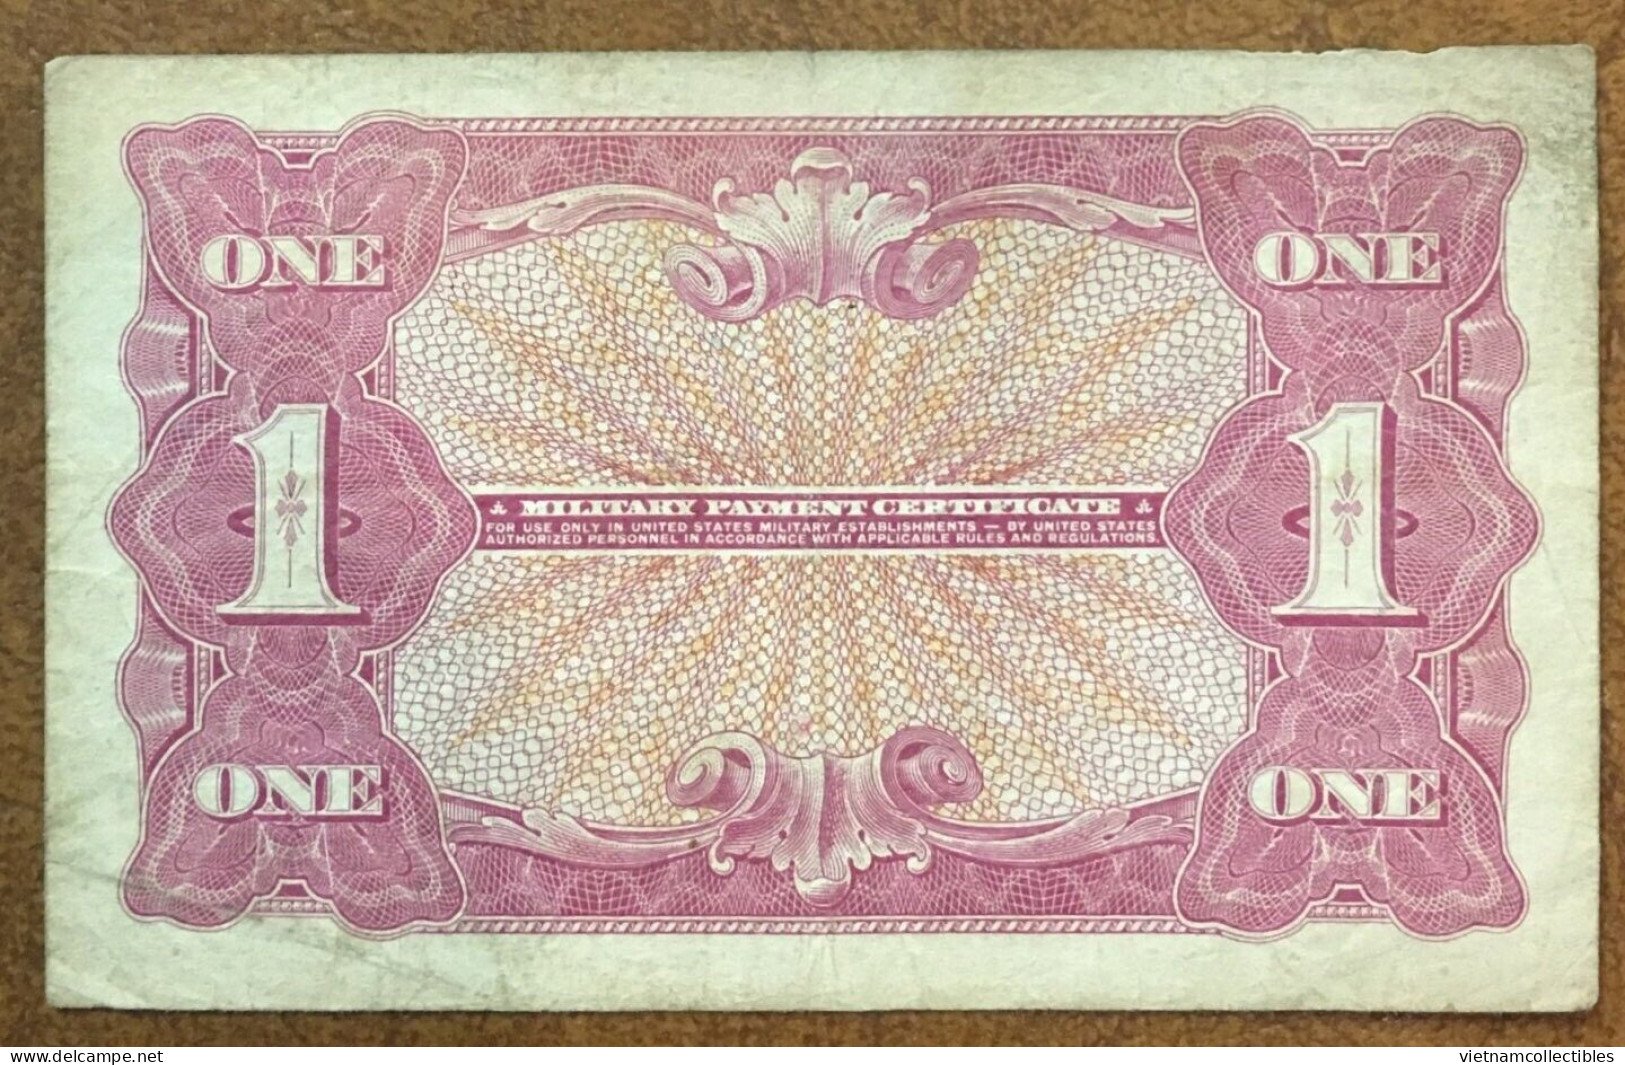 USA MPC One Dollar Military Payment Series 641 VF Banknote Note 1964 Using In Vietnam Viet Nam - Plate # 17 / 2 Photos - 1965-1968 - Series 641